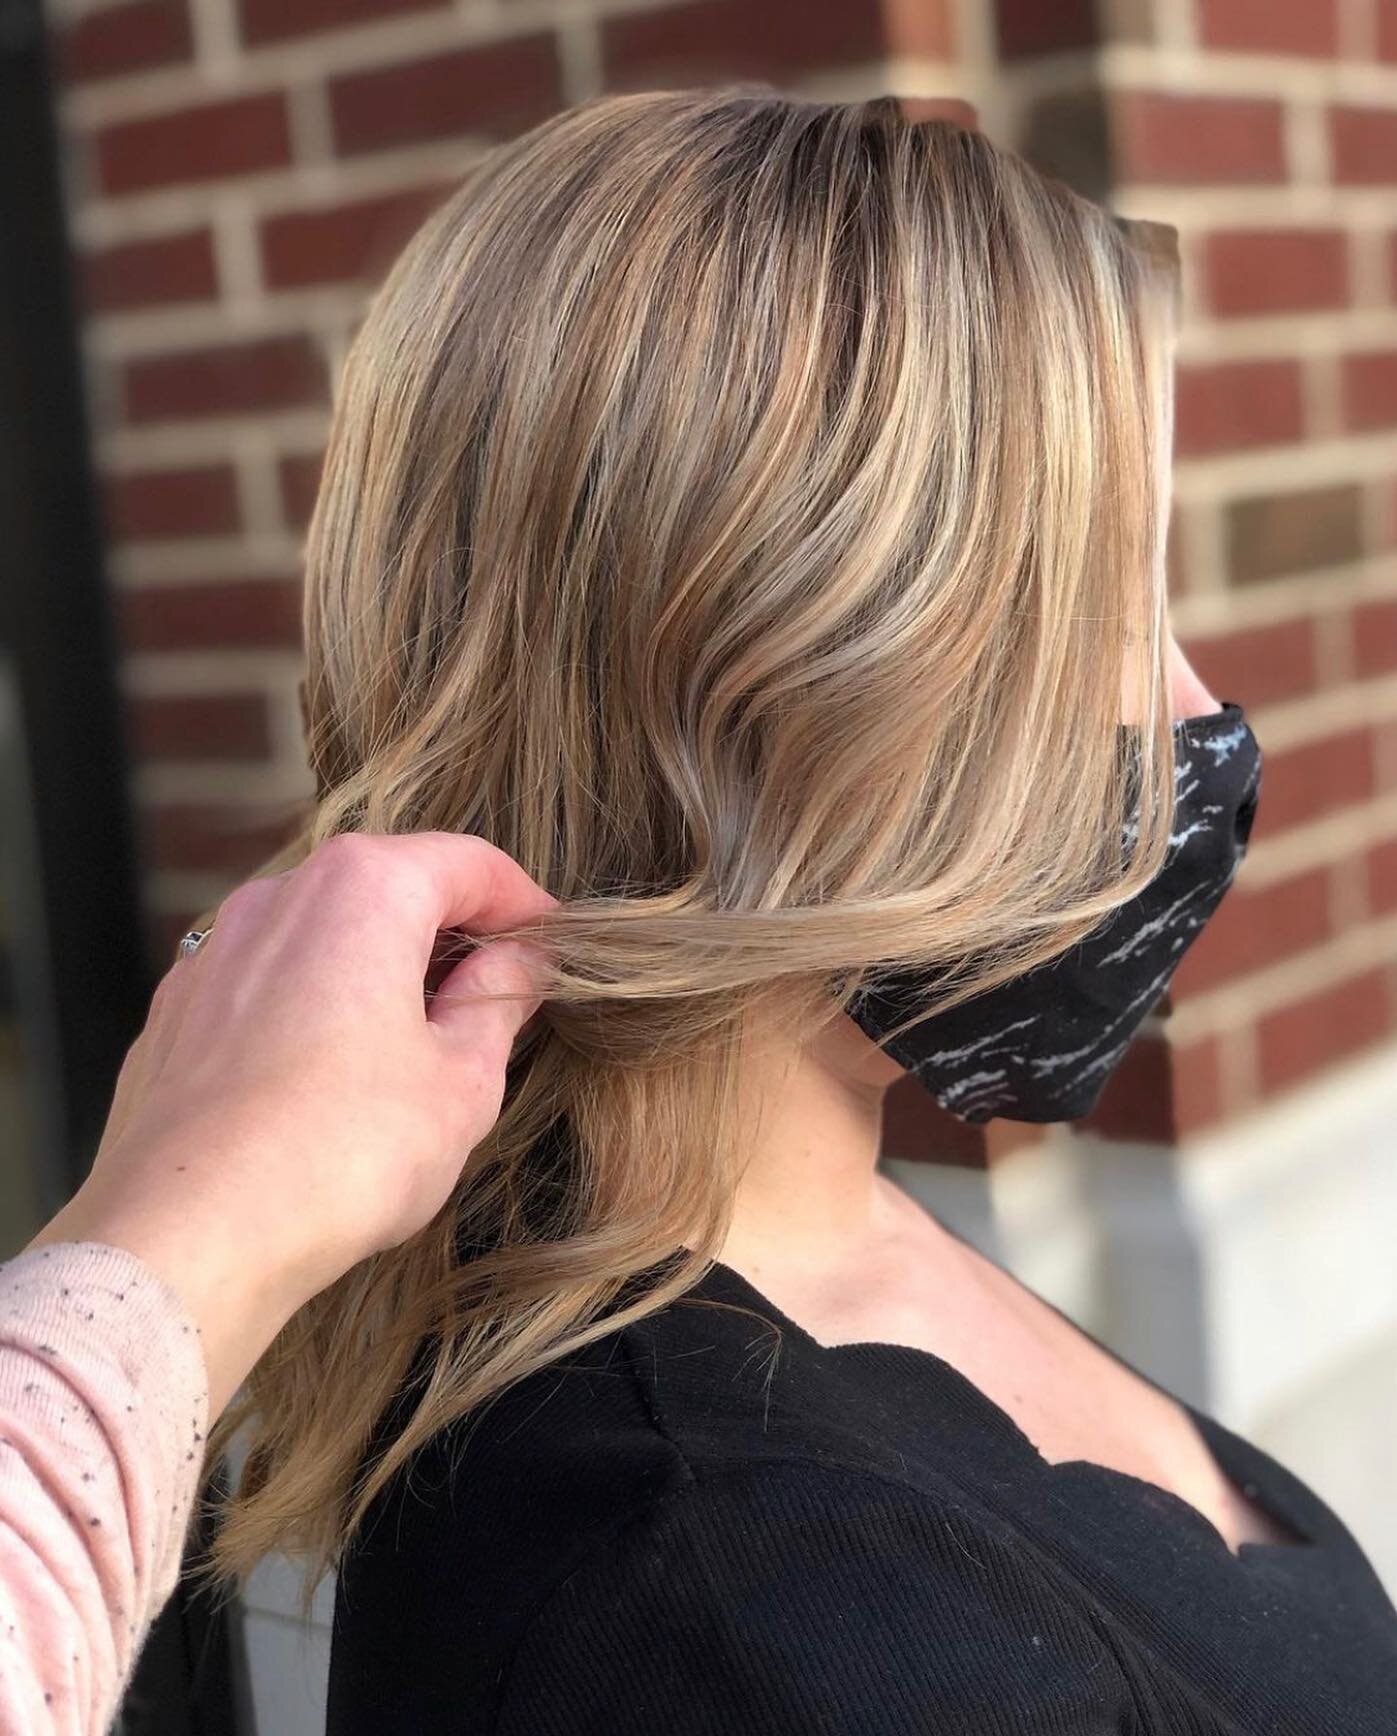 Leaving the salon with your desired shade of blonde is only part of the equation ✨

An home haircare routine is a must for keeping it healthy, shiny and bright! 

Here are some helpful recommendations for keeping blonde hair looking its best in betwe